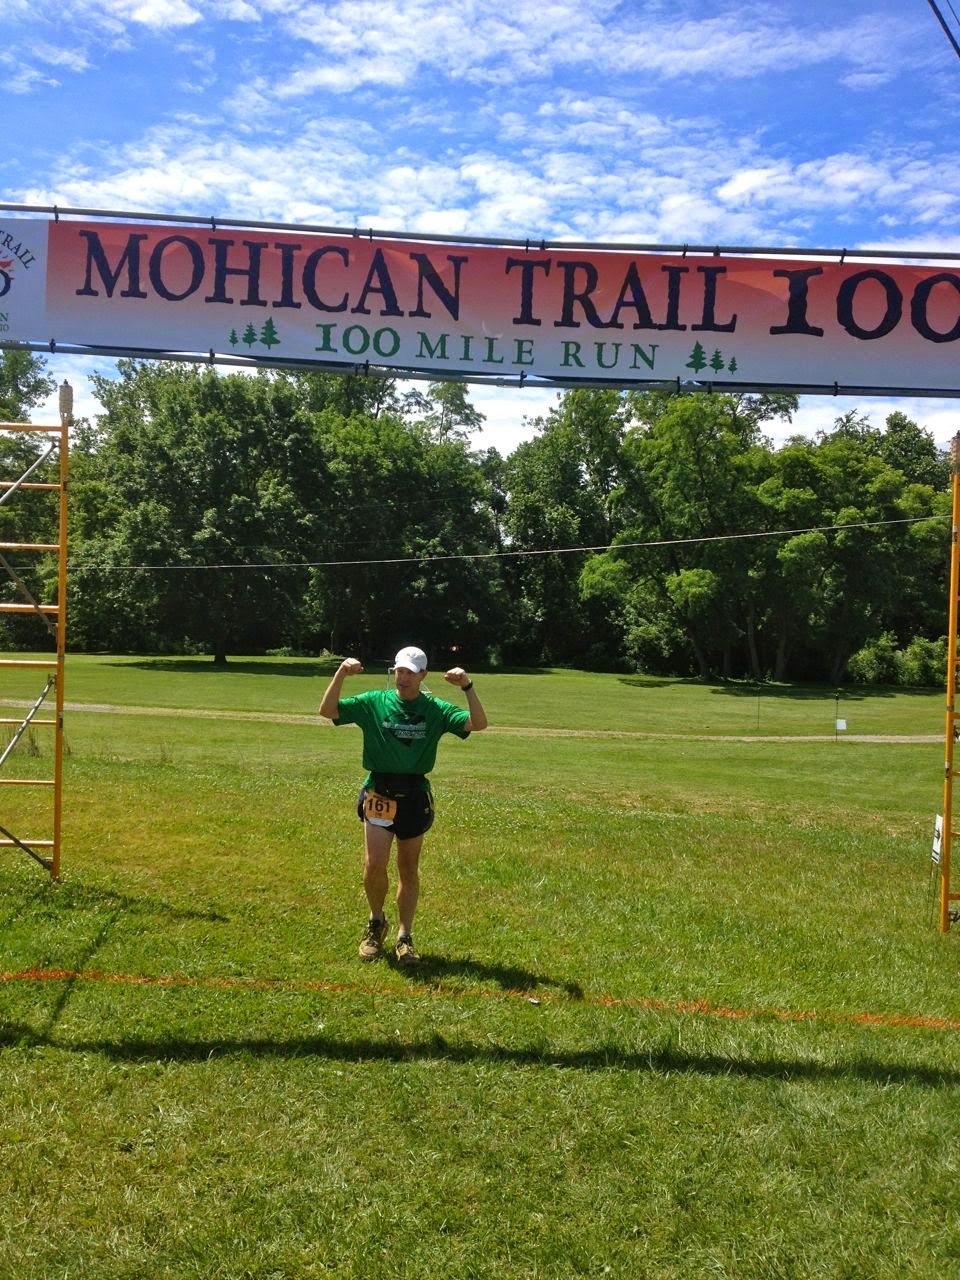 Tim C. Smith Mohican Trail 100 Mile Run